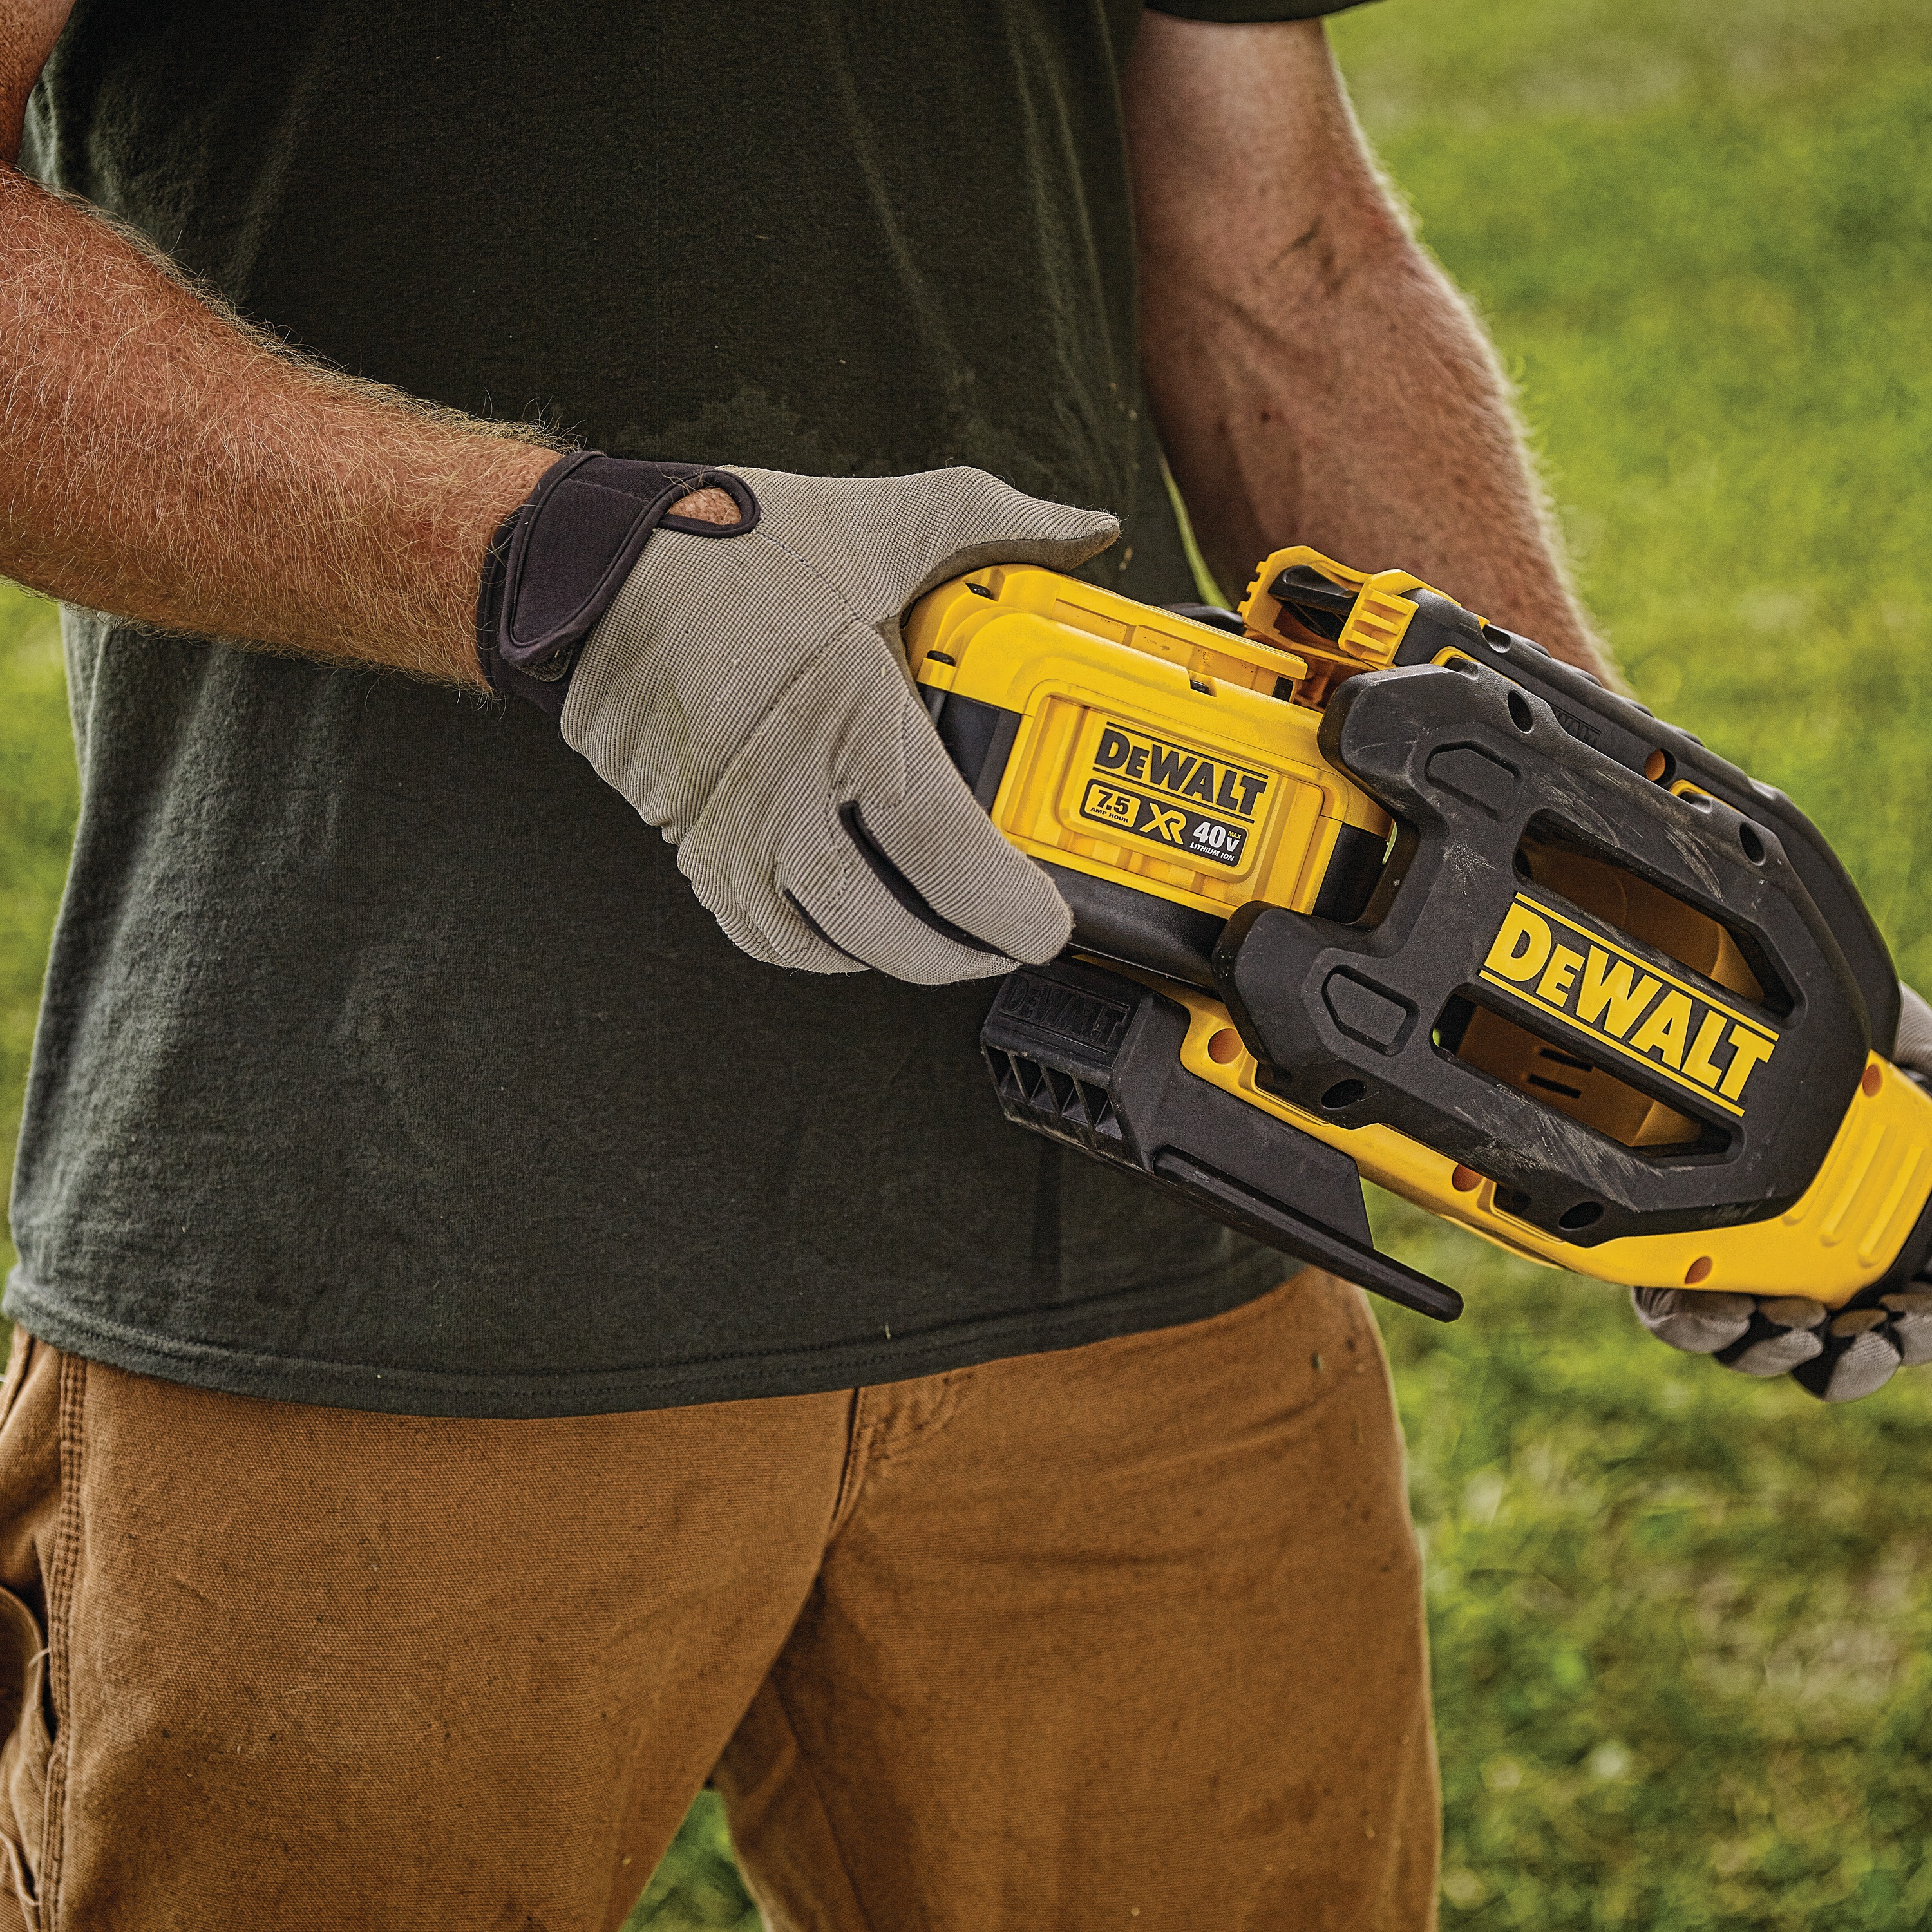 40 Volt 7.5 AMP hours Lithium-Ion Battery Easy-to-Insert feature for all outdoor tools